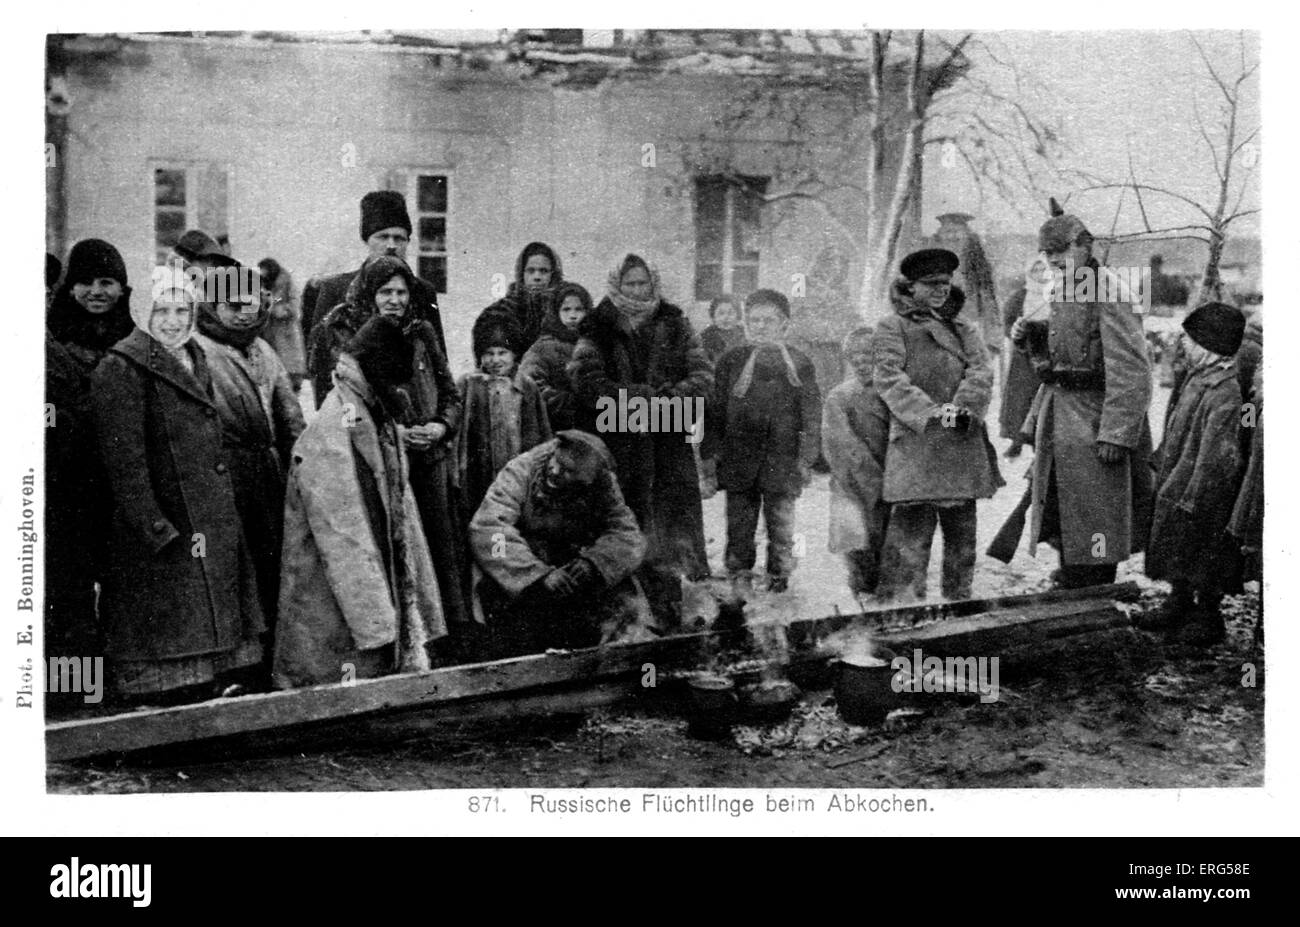 German Occupation on the Eastern Front in World War I. Taken from photograph, shows a group of Russian refugees gathered around boiling pots. Winter scene.Caption: Russische Flüchtlinge beim Abkochen'/ 'Russian refugees boiling food' . (probably modern day Poland) From 'Unter deutscher Besatzung' / 'Under German Occupation' collection Stock Photo